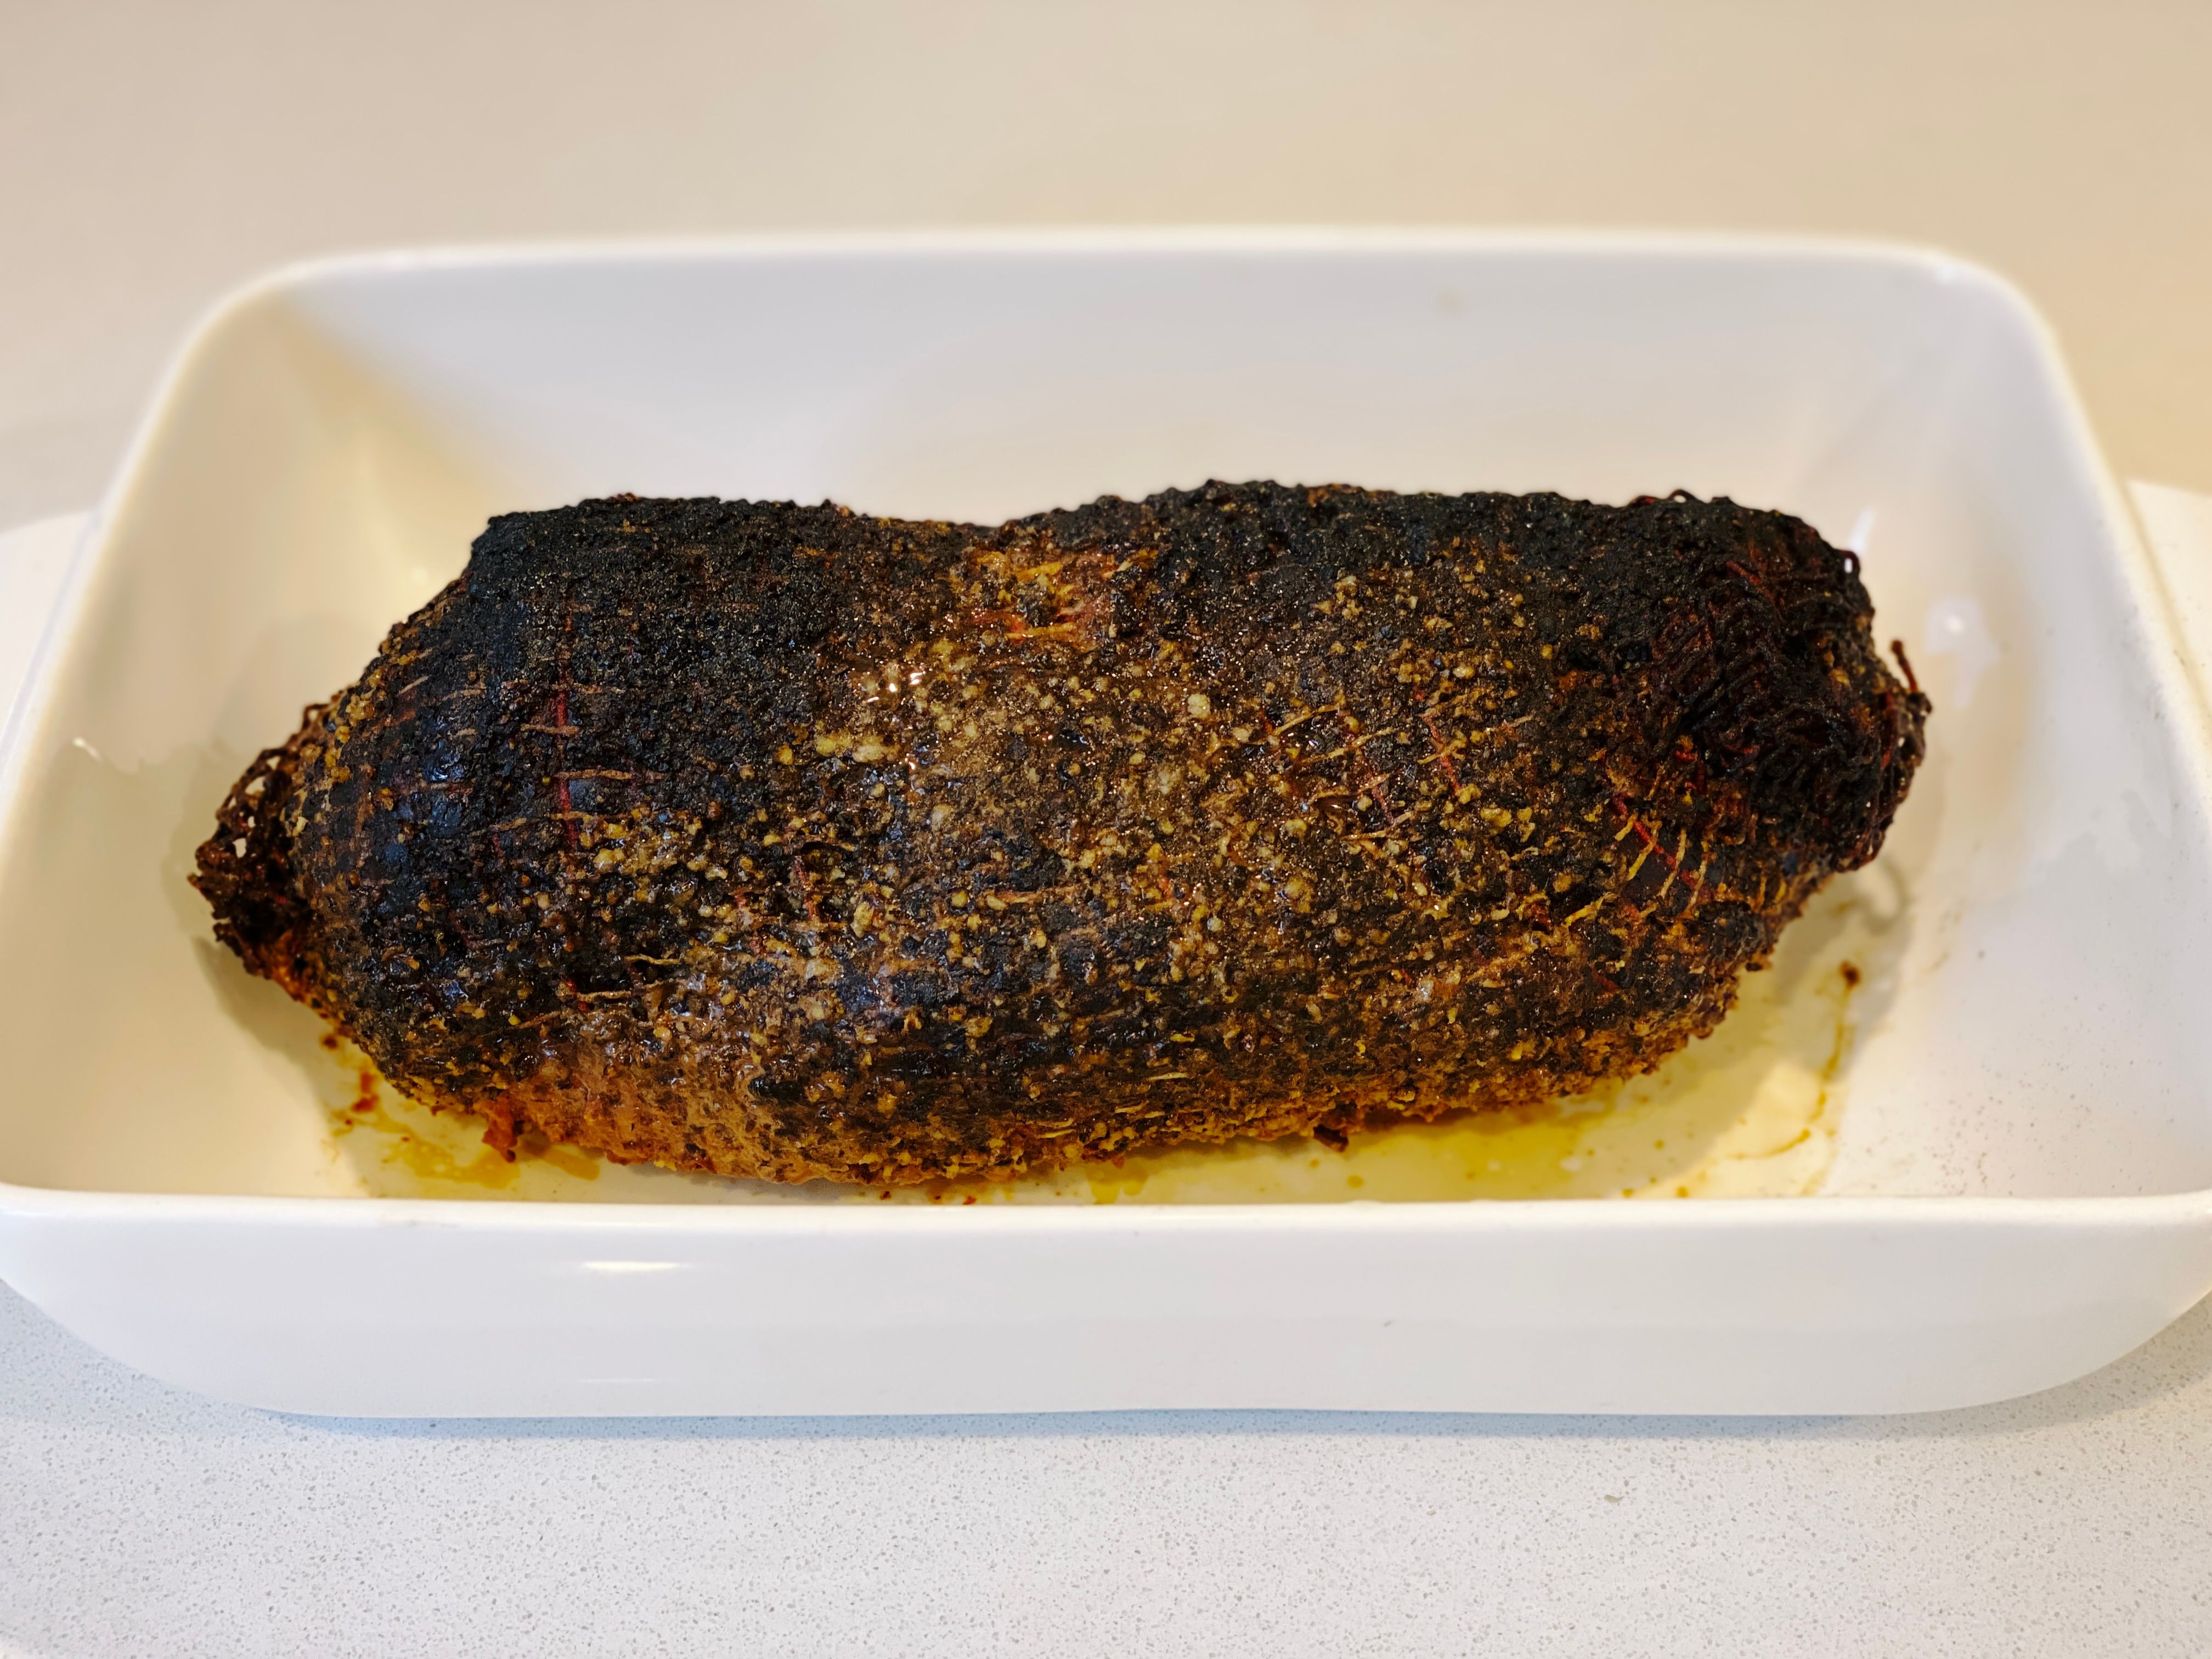 A photo of a pork collar butt that's been smoked, it's blackened and looks amazing.